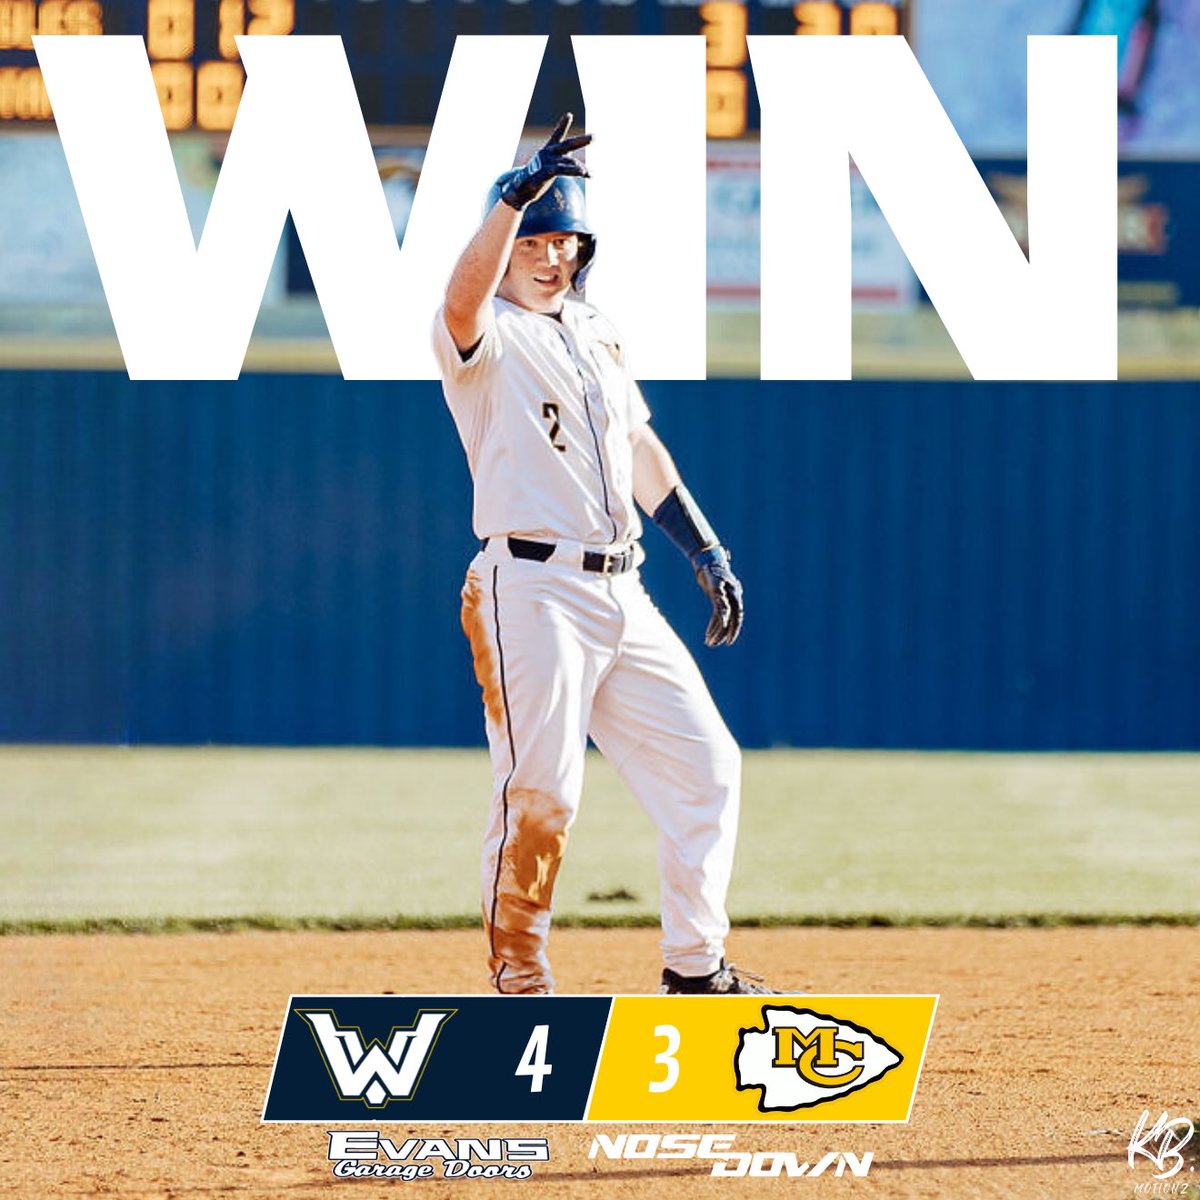 Mustangs get the DUB behind complete game from Titus Torbett; HR from Braxton Smith, rbi from Jordan Smith and the big 2 rbi single from Conner Phillips! Mustangs will host McMinn tomorrow at 5. #PackTheMike!